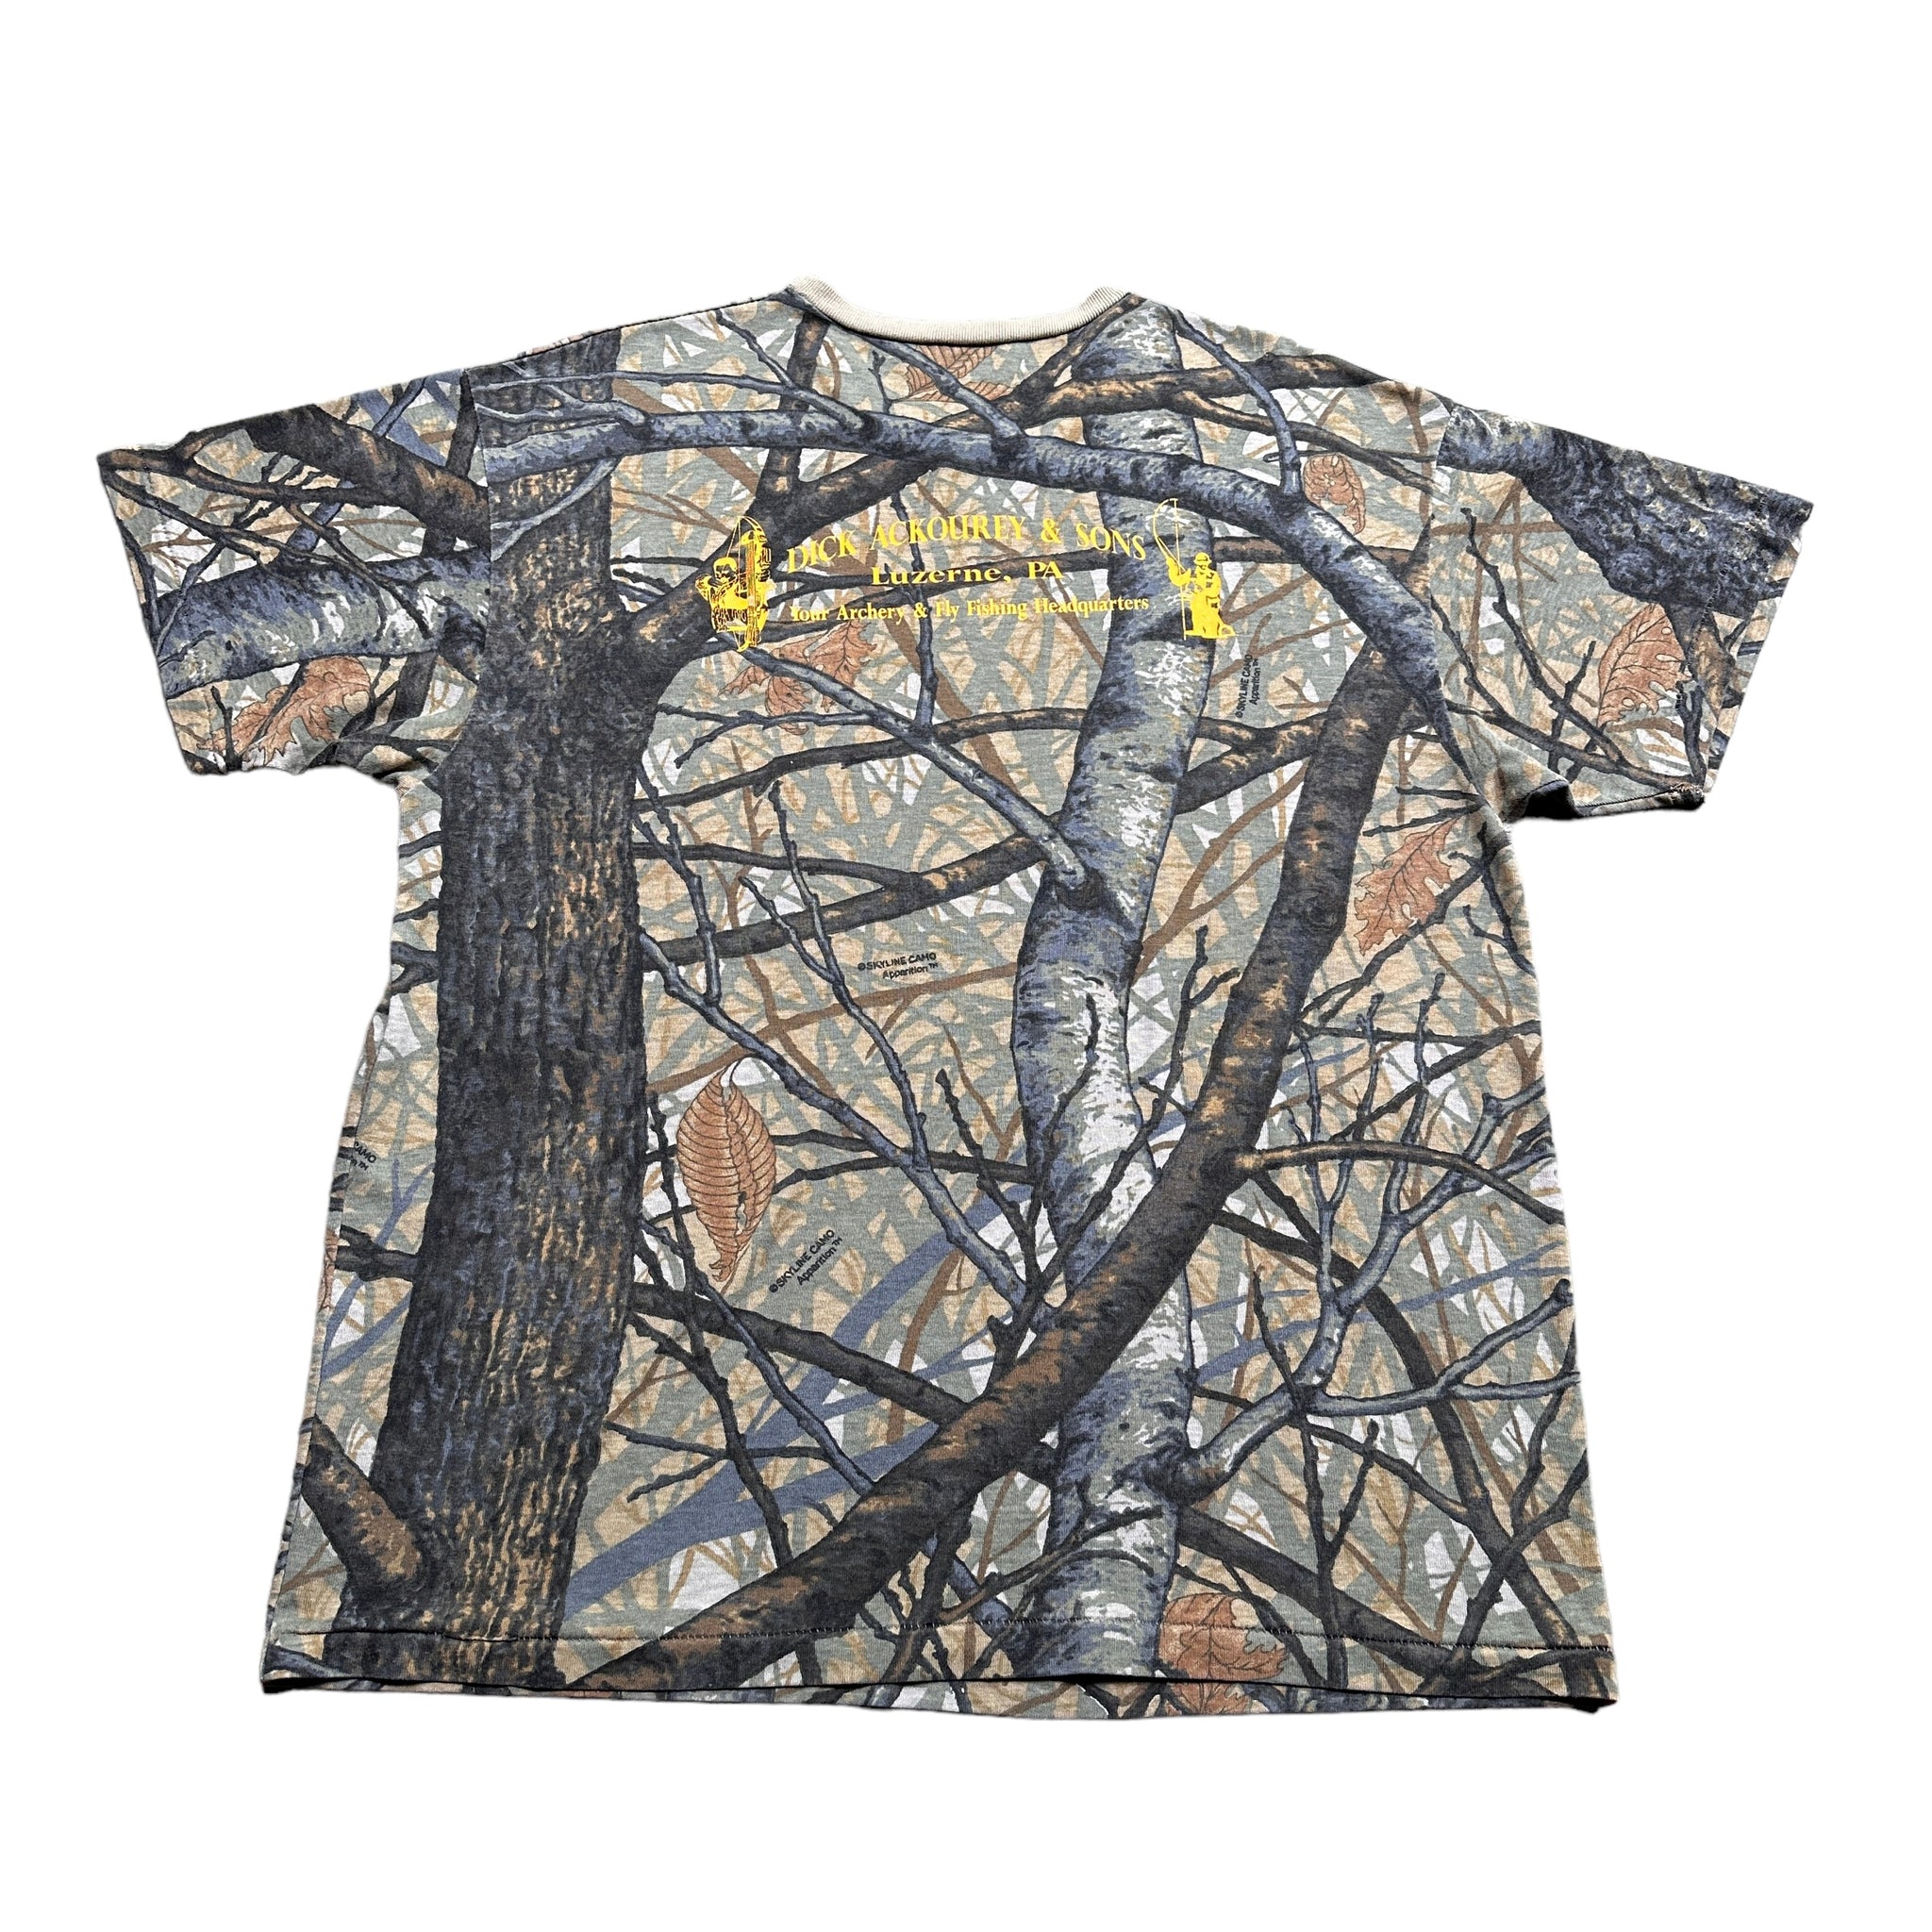 90s Pennsylvania and fishing and archery camo tee large